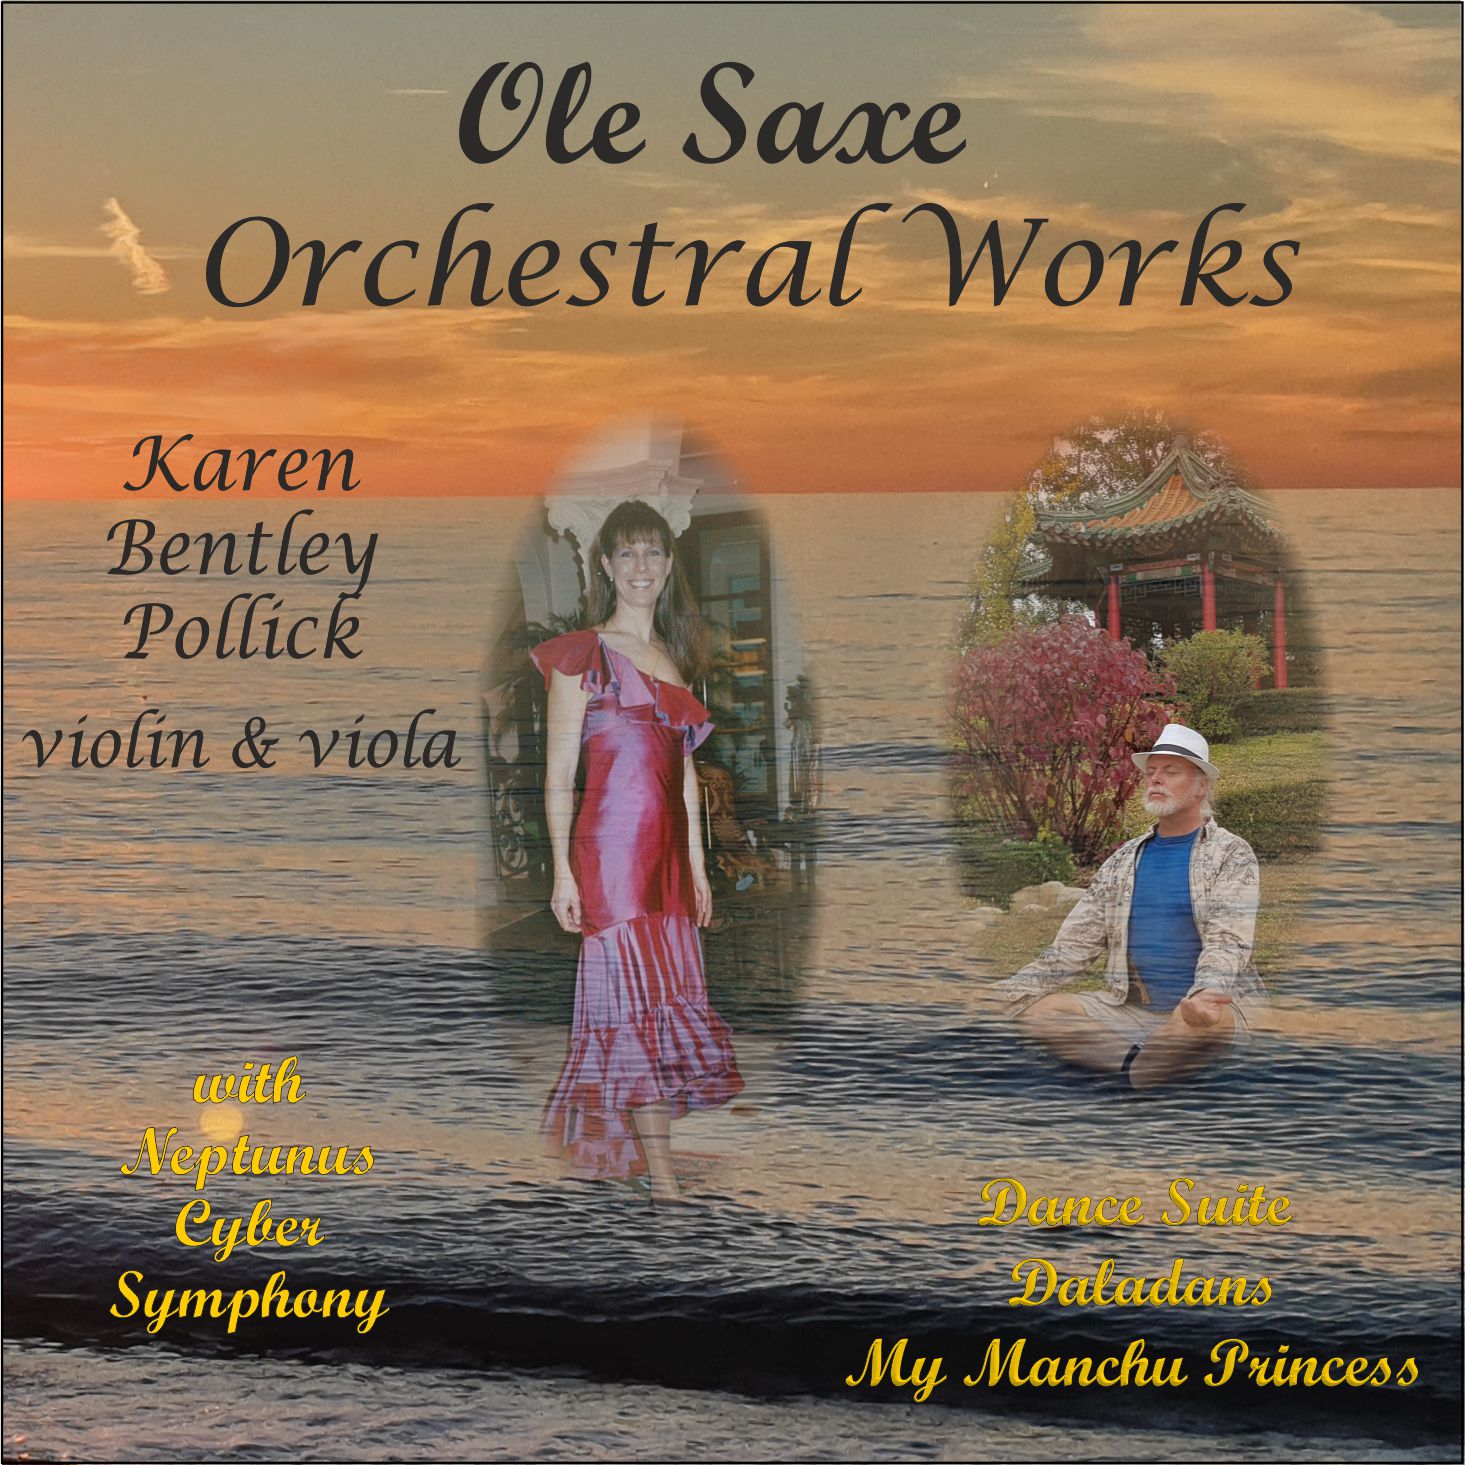 Ole Saxe Orchestral Works CD cover